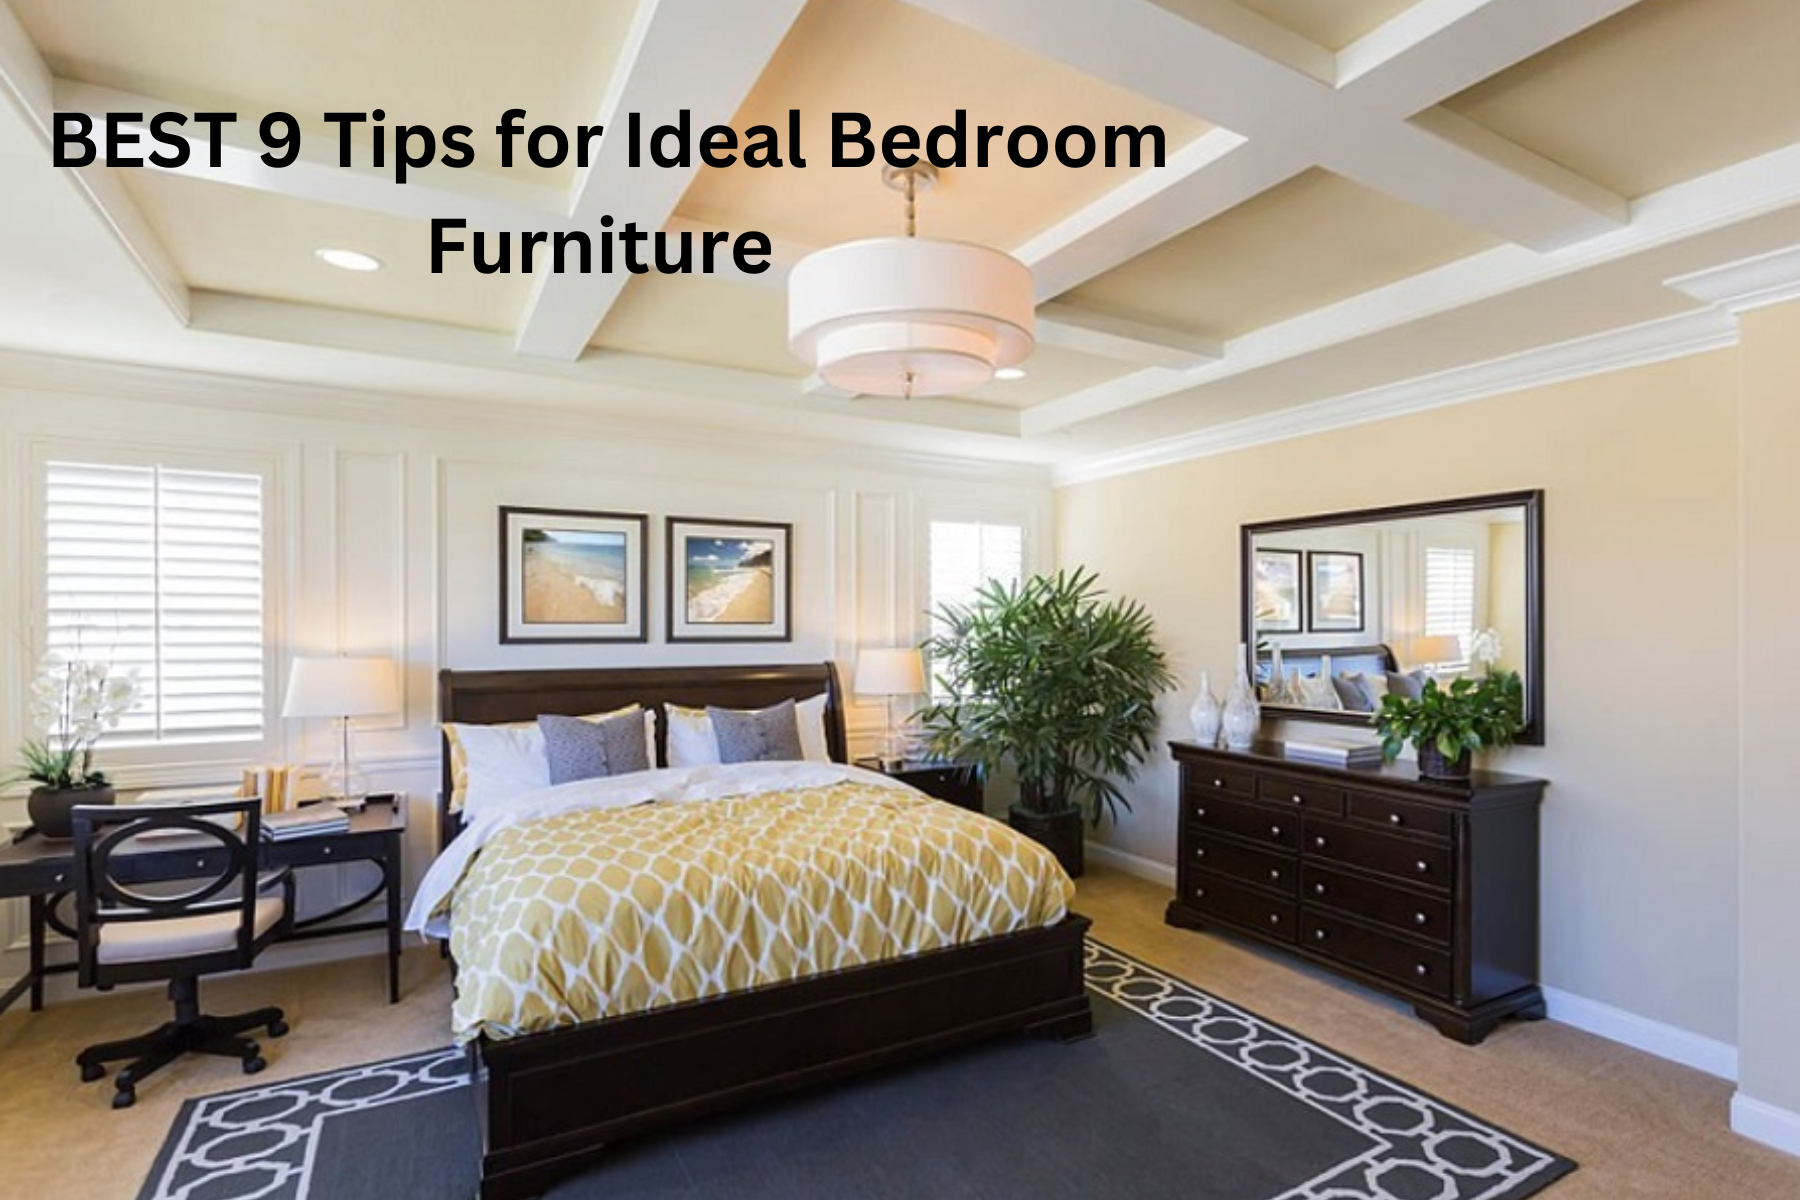 9 Essential Tips for buying an Ideal Bedroom Furniture